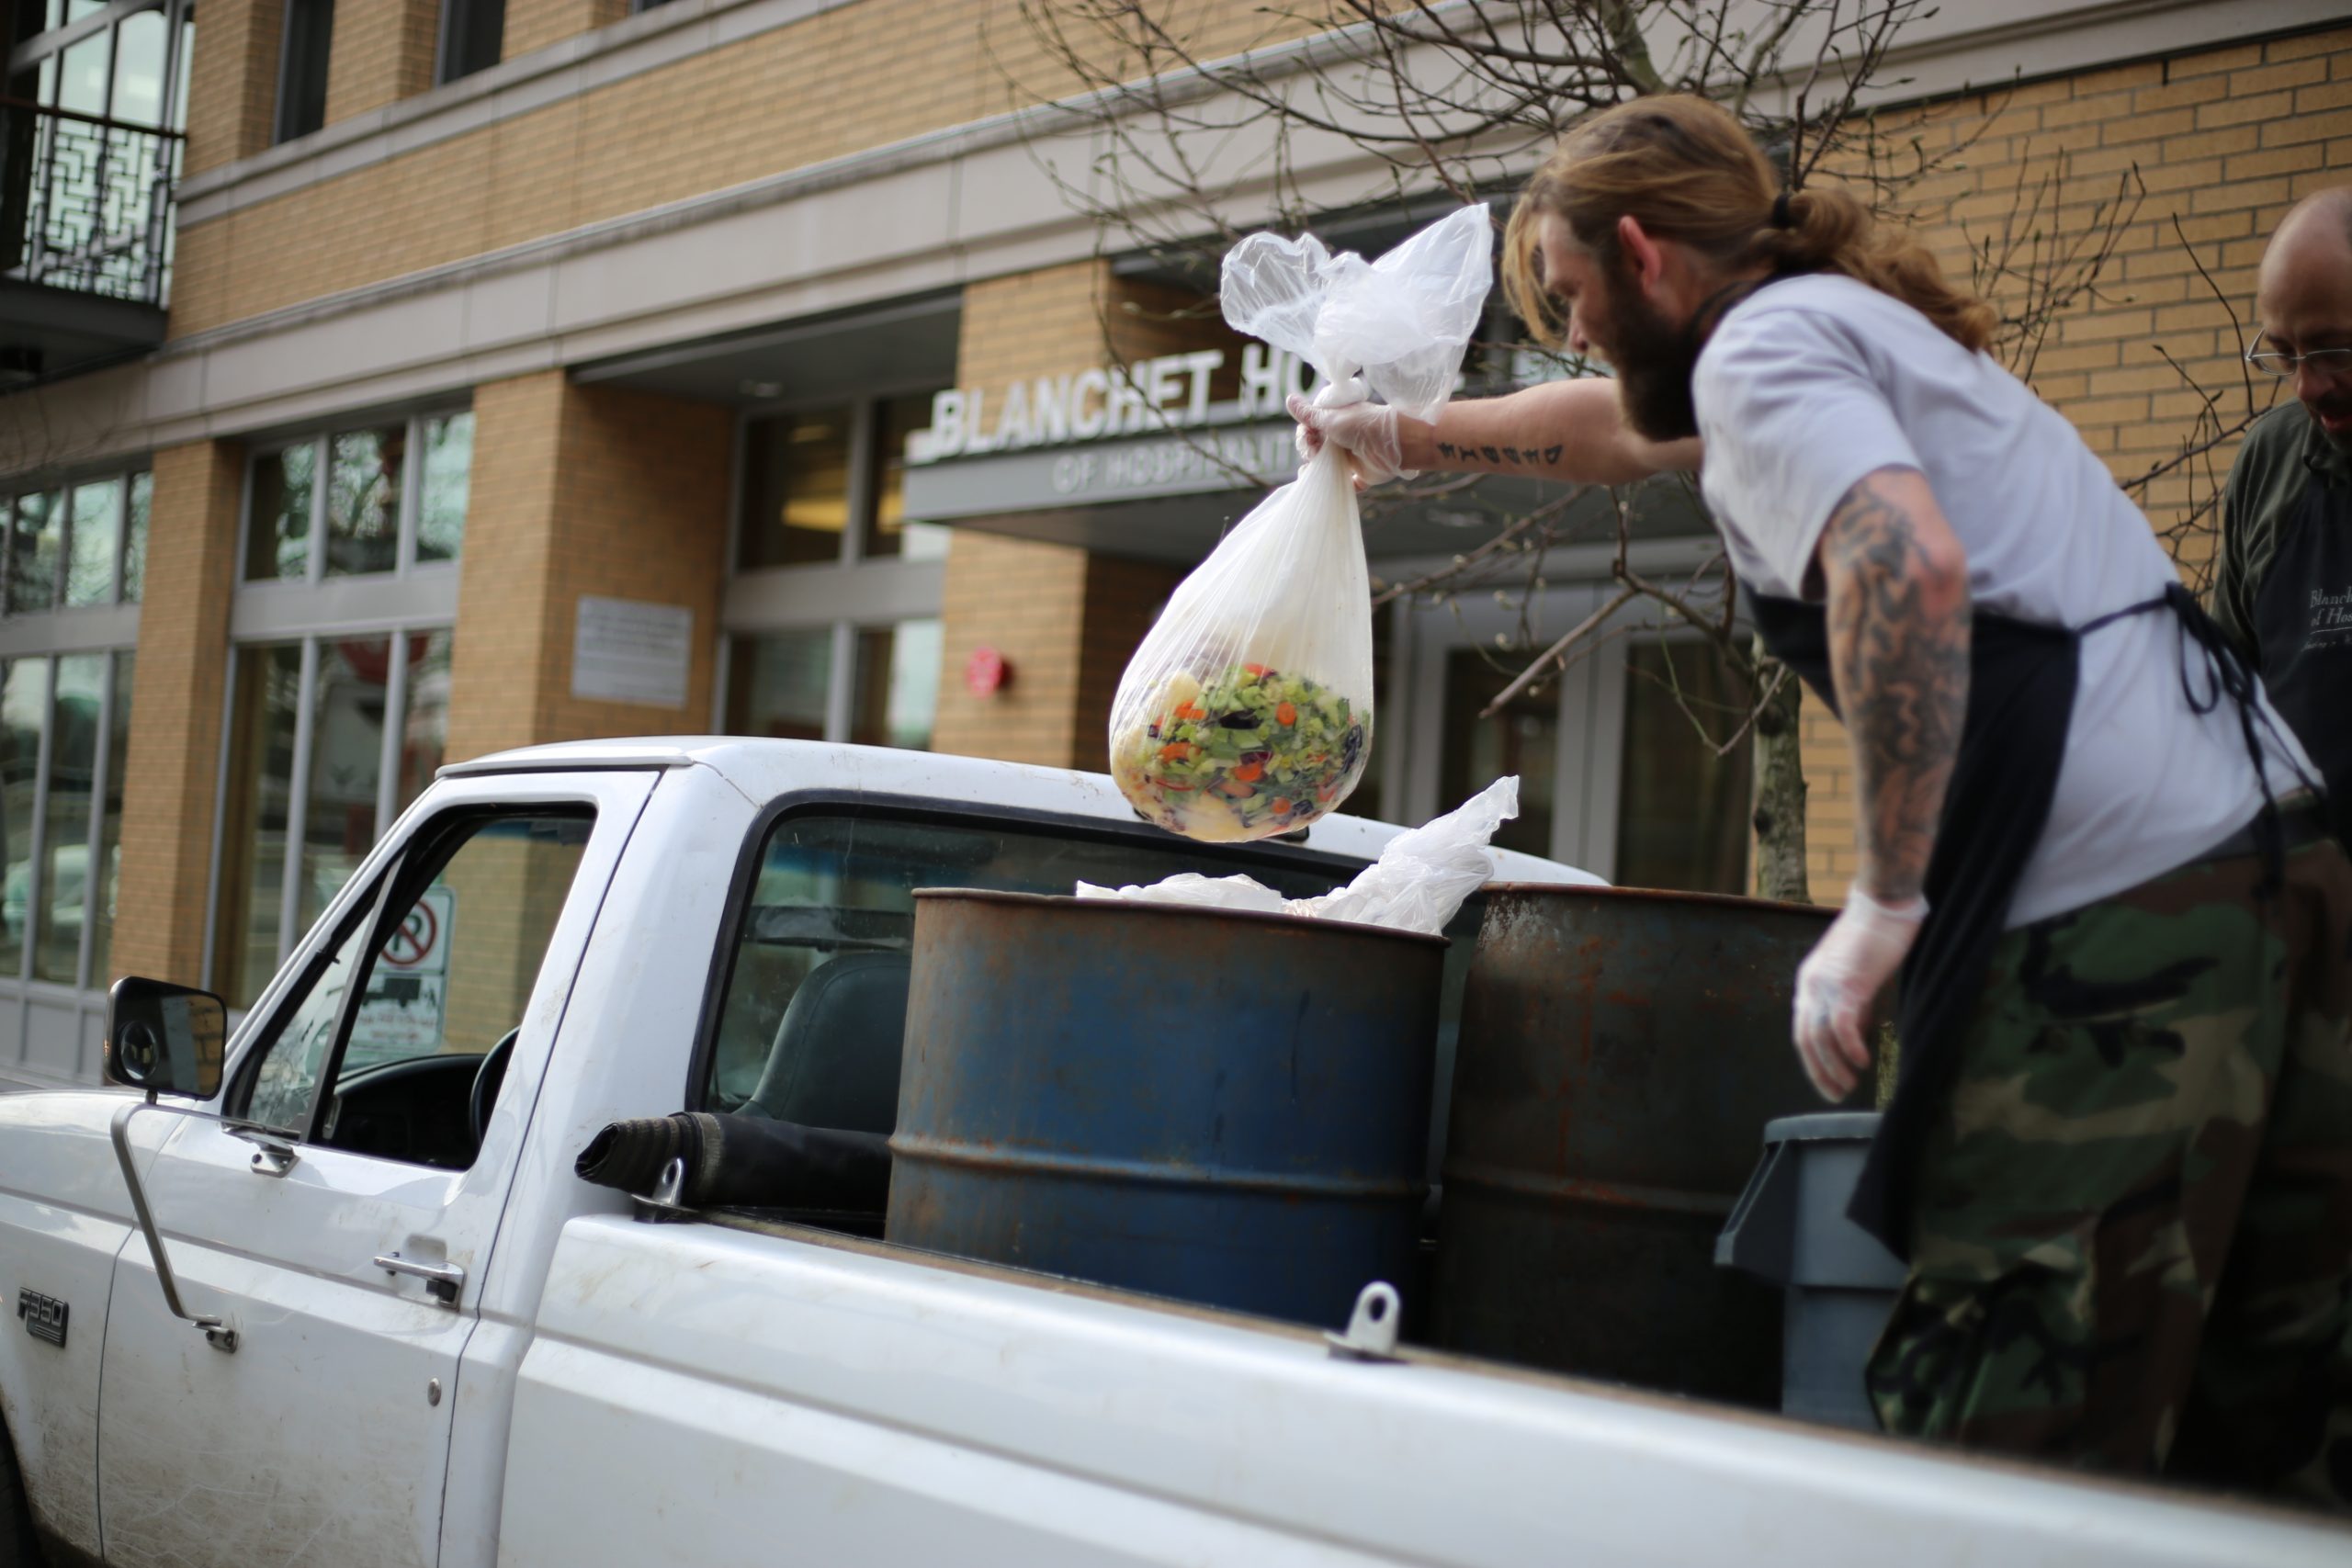 A resident of Blanchet House loads food scraps on to a truck to help the nonprofit kitchen be more sustainable.